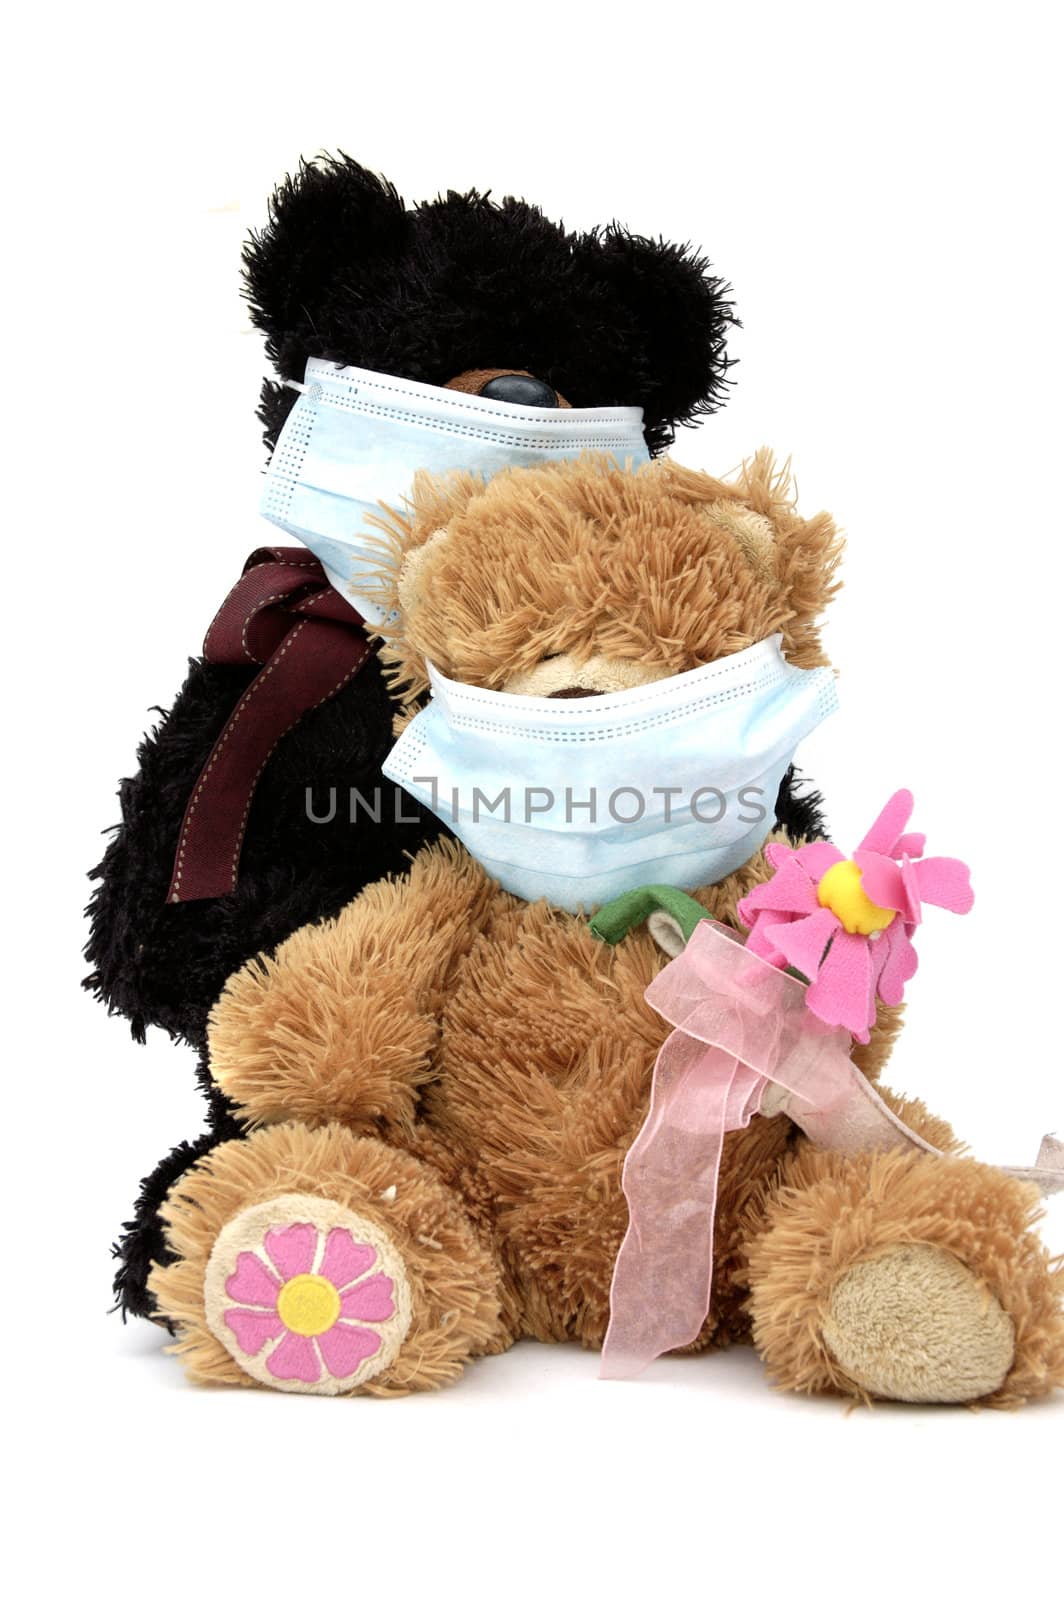 Teddy bear toys wearing surgical masks protect themselves of flu